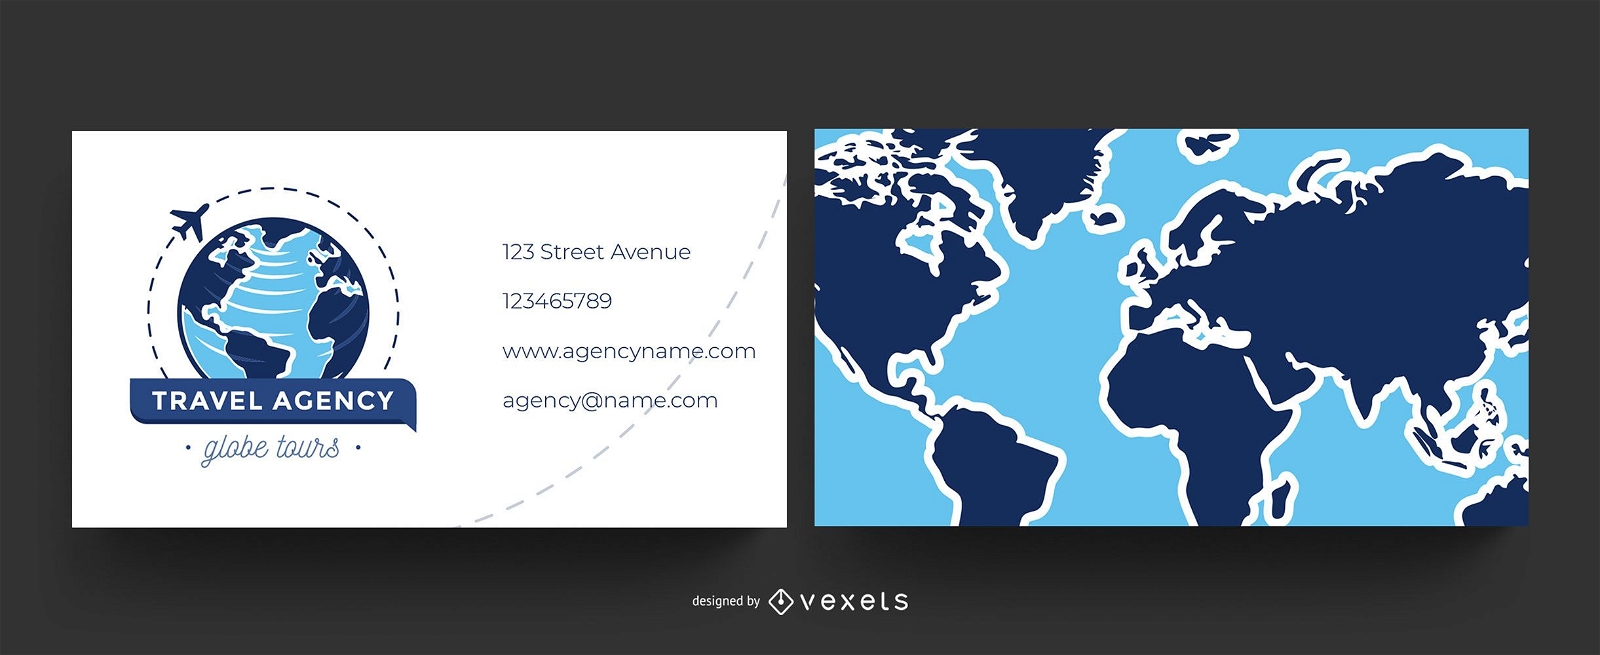 Travel agency world business card